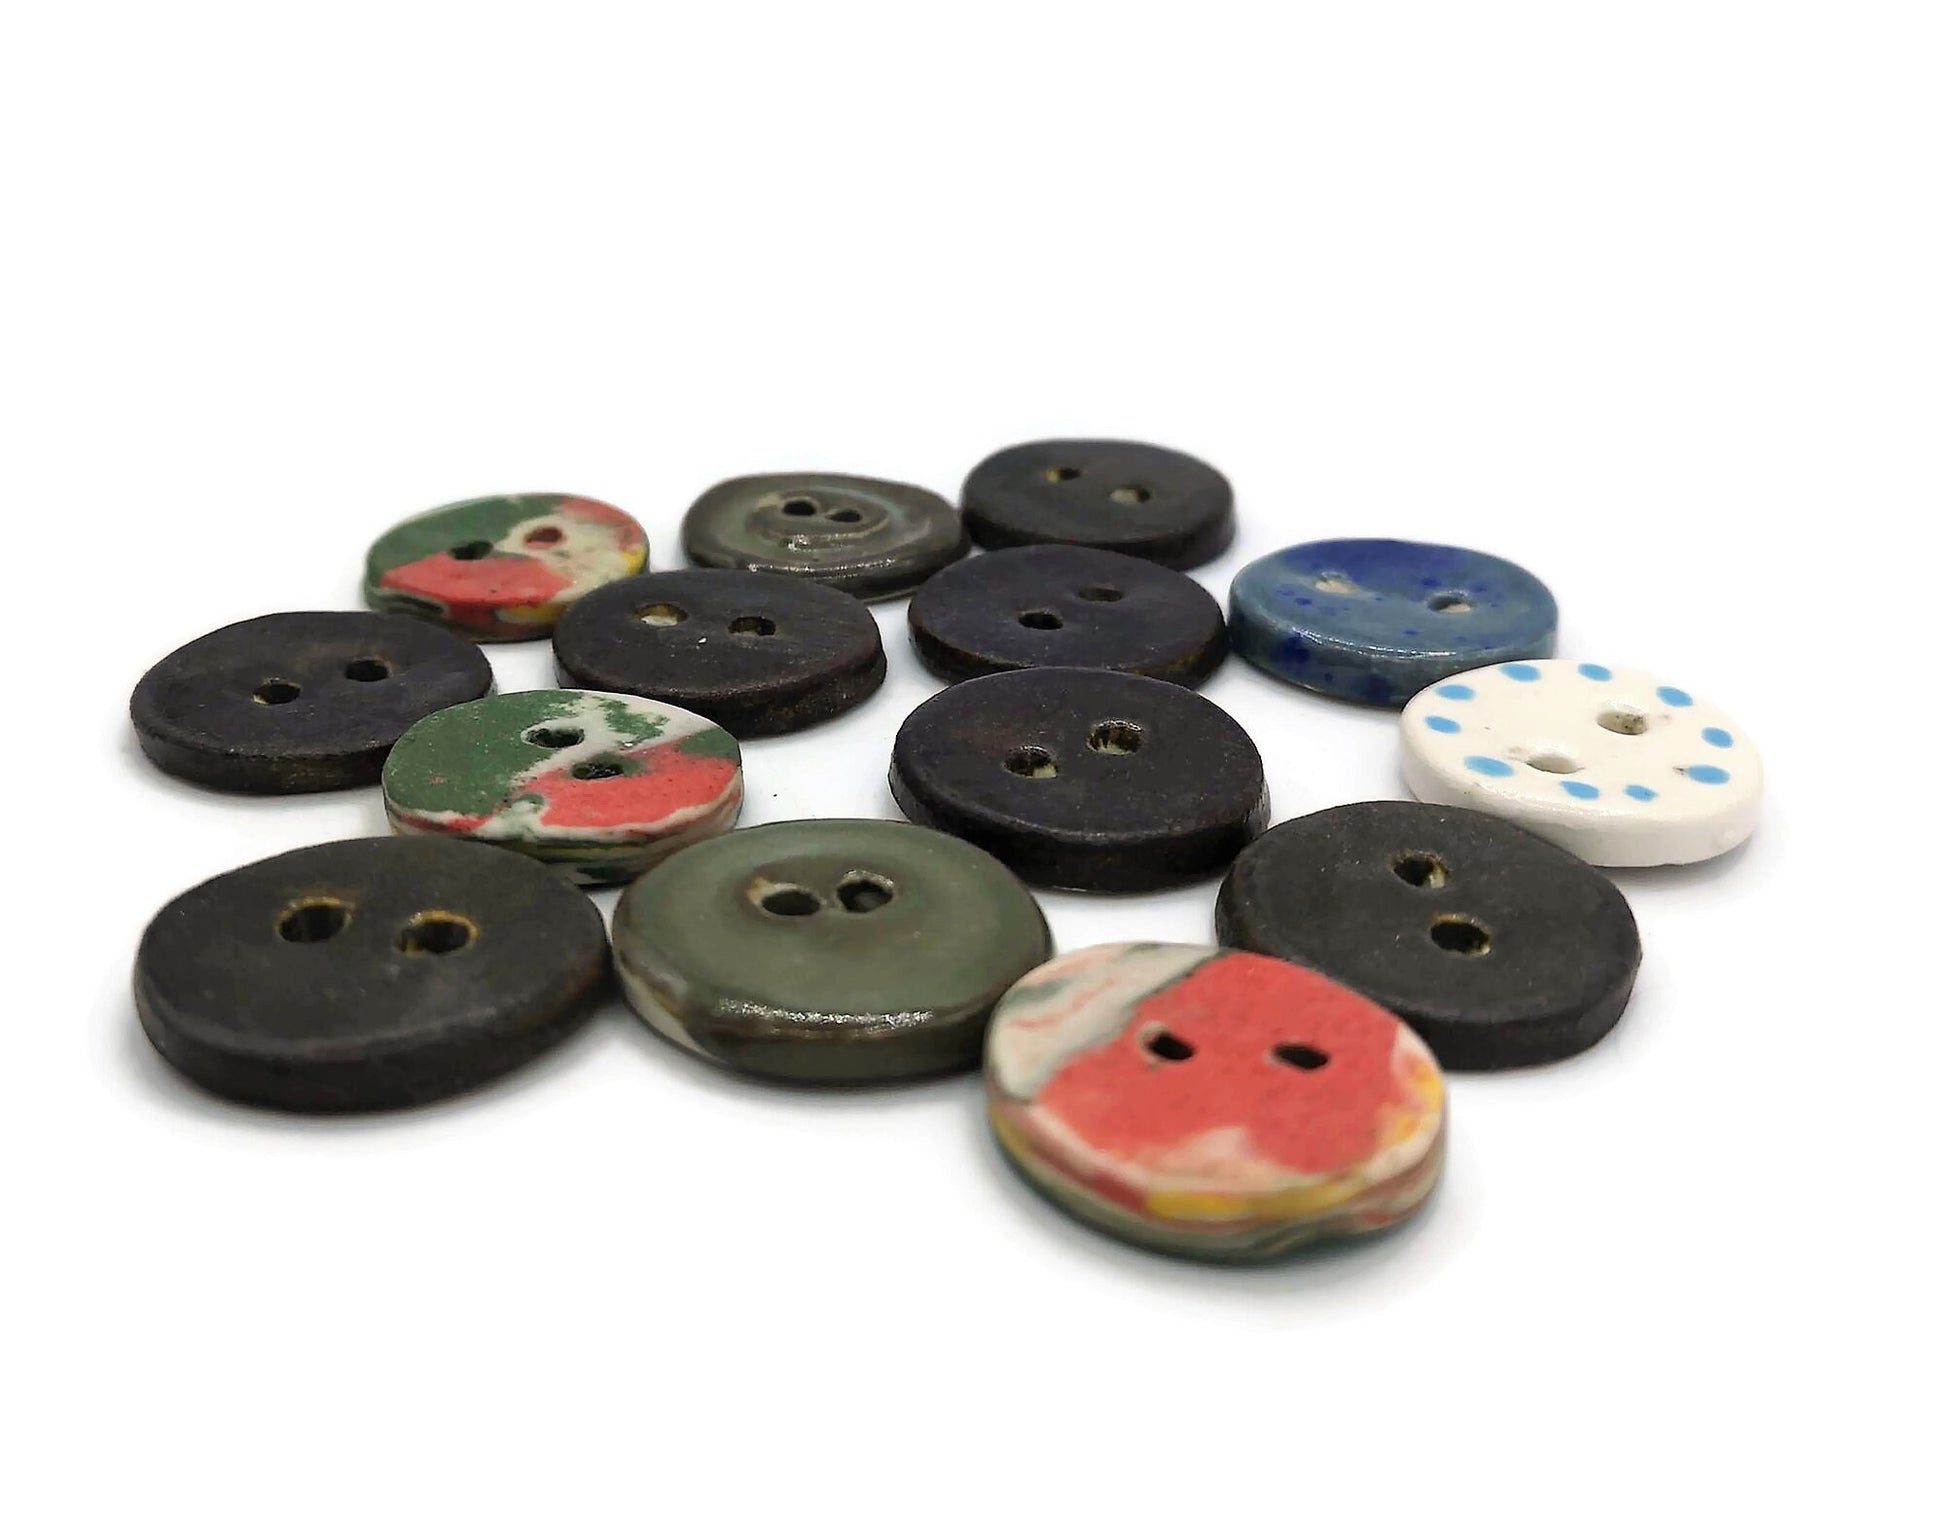 14Pc 25mm/1in Large Sewing Buttons Lot, Assorted 25mm Flatback Sew Fasteners, Handmade Ceramics Coat Button For Crafts - Ceramica Ana Rafael